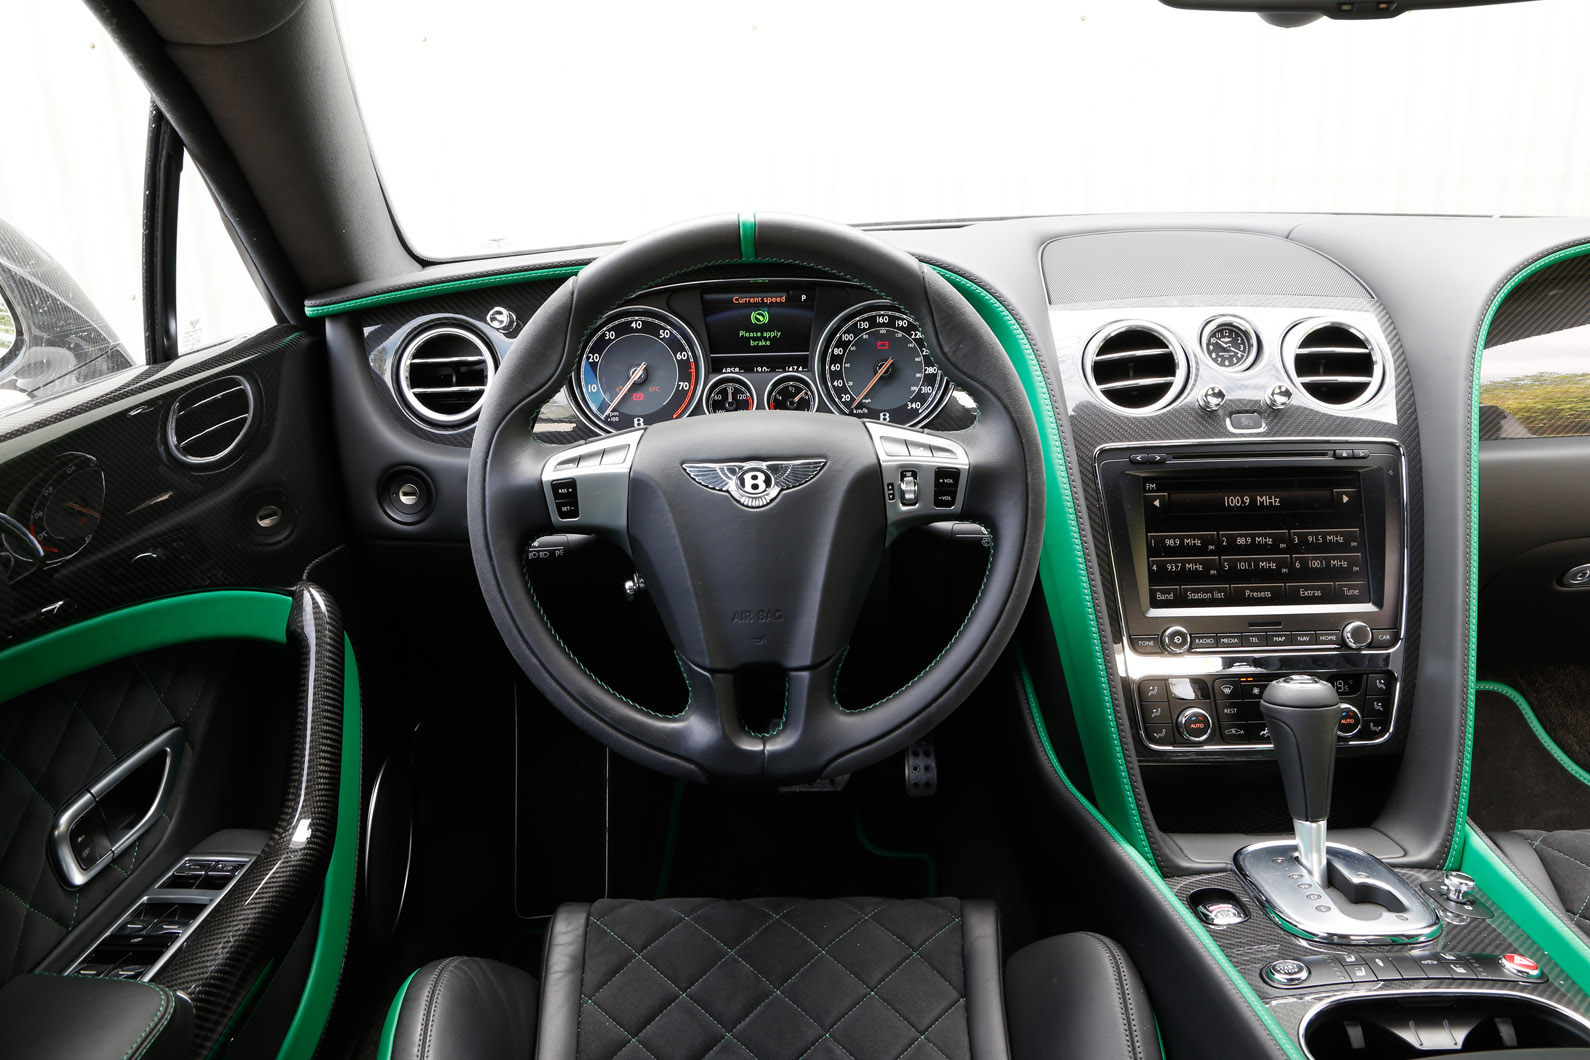 Bentley Continental GT3-R driver's seat